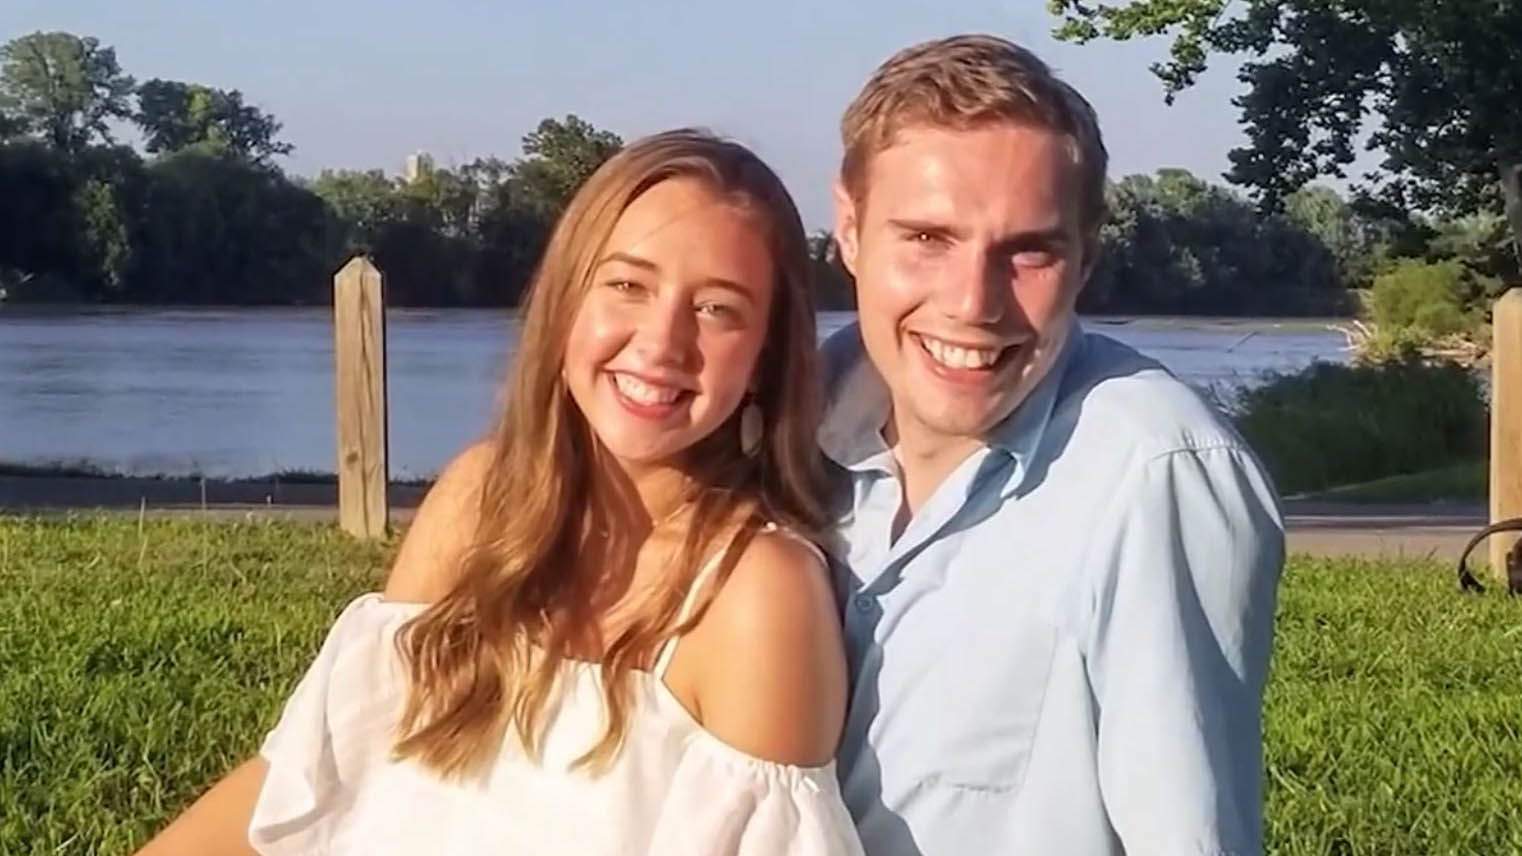 Wedding video company denies refund after man’s fiancee dies, reportedly taunts him on wedding day on social media